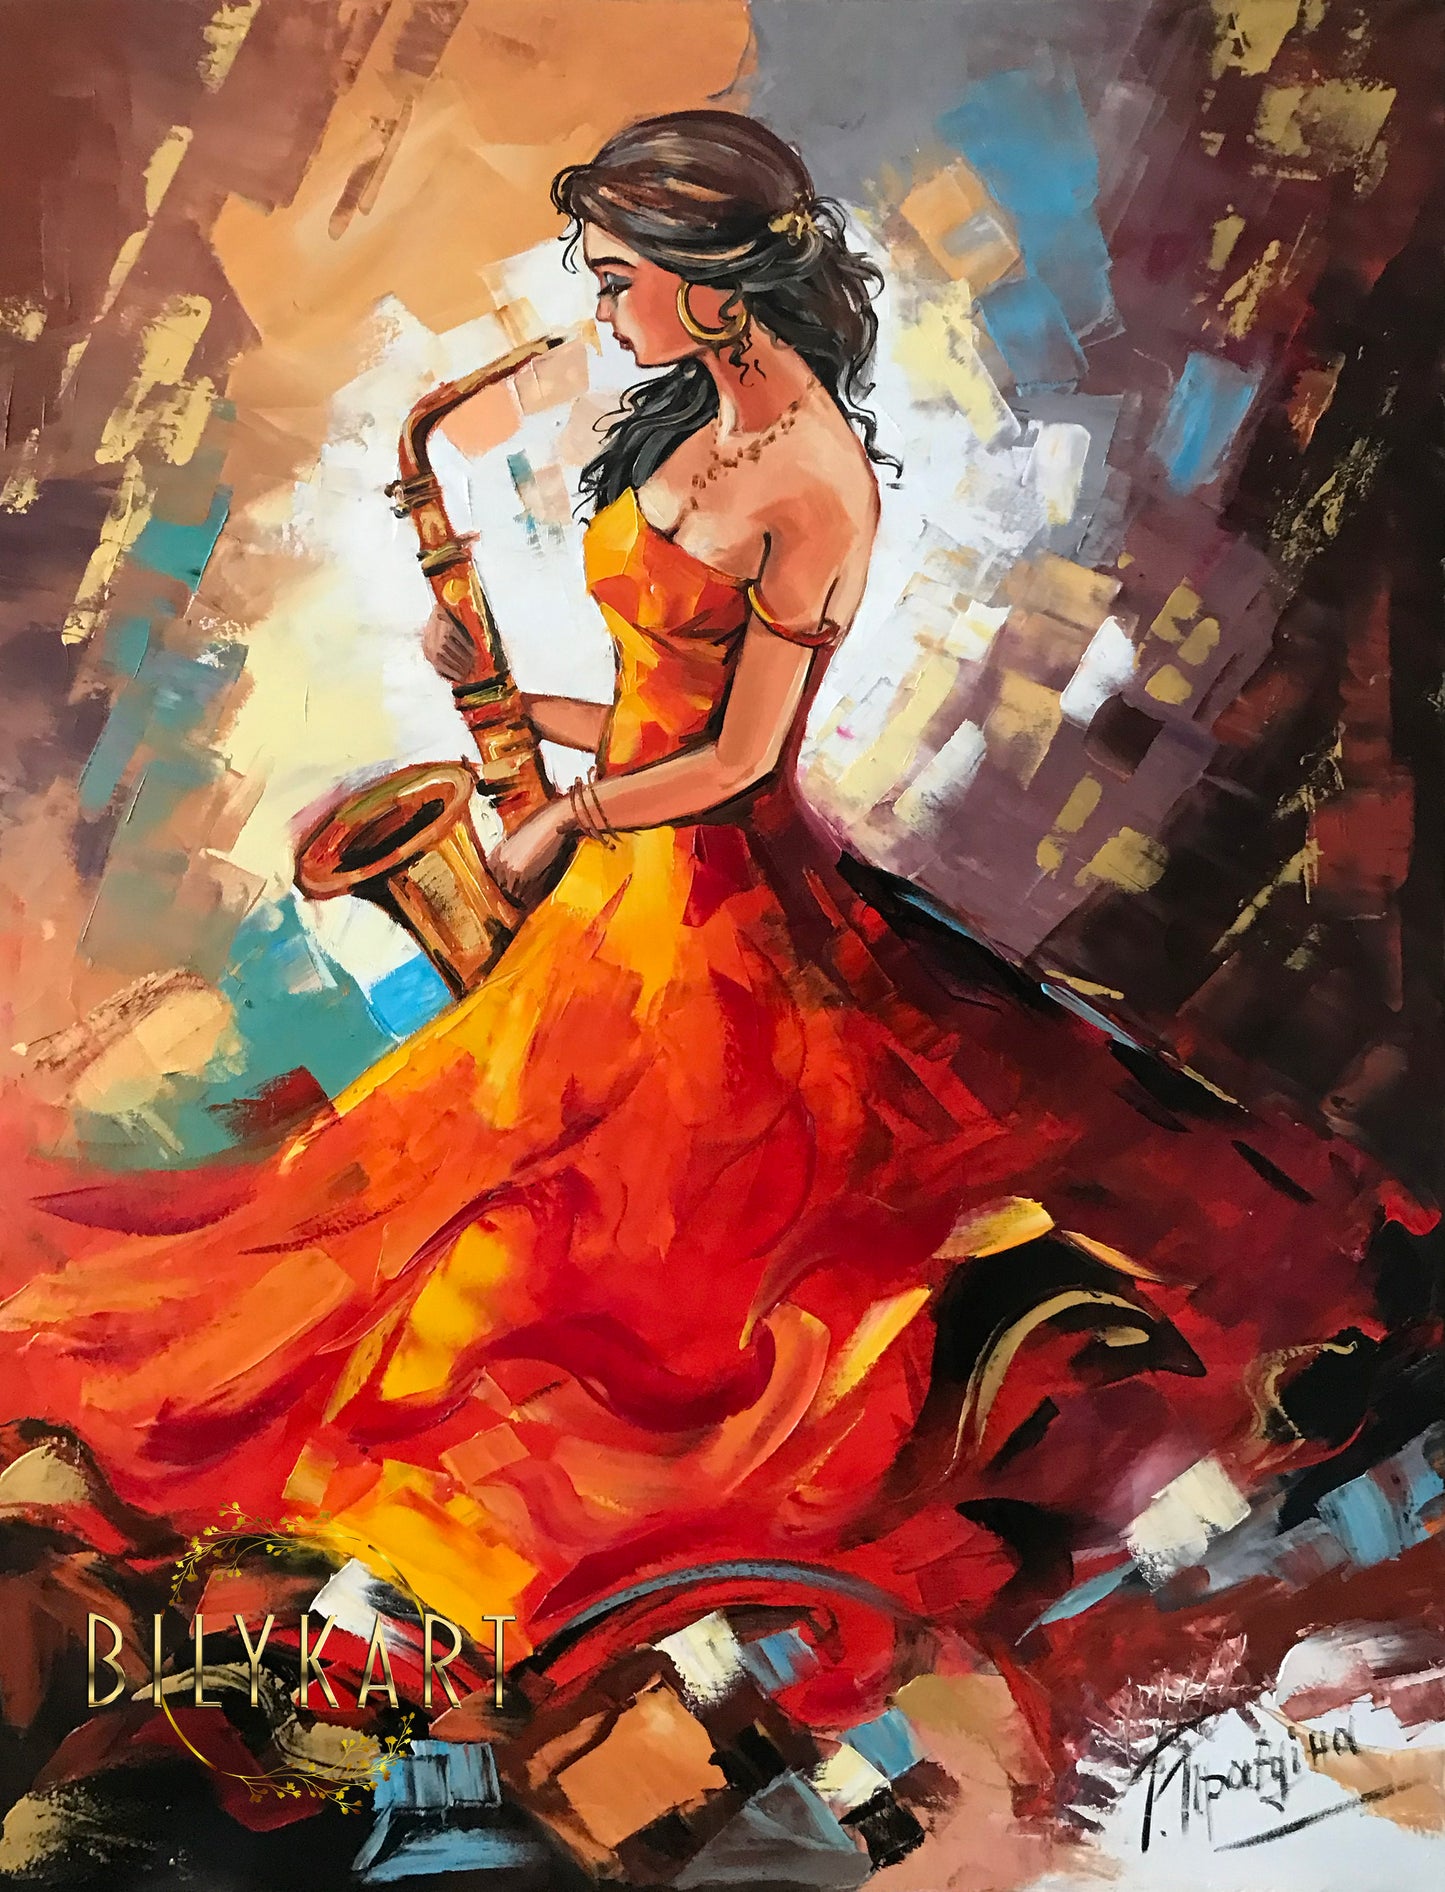 Abstract Girl Playing Saxophone Painting on Canvas, Jazz Woman Art, Elegant Lady in Red Dress Oil Painting